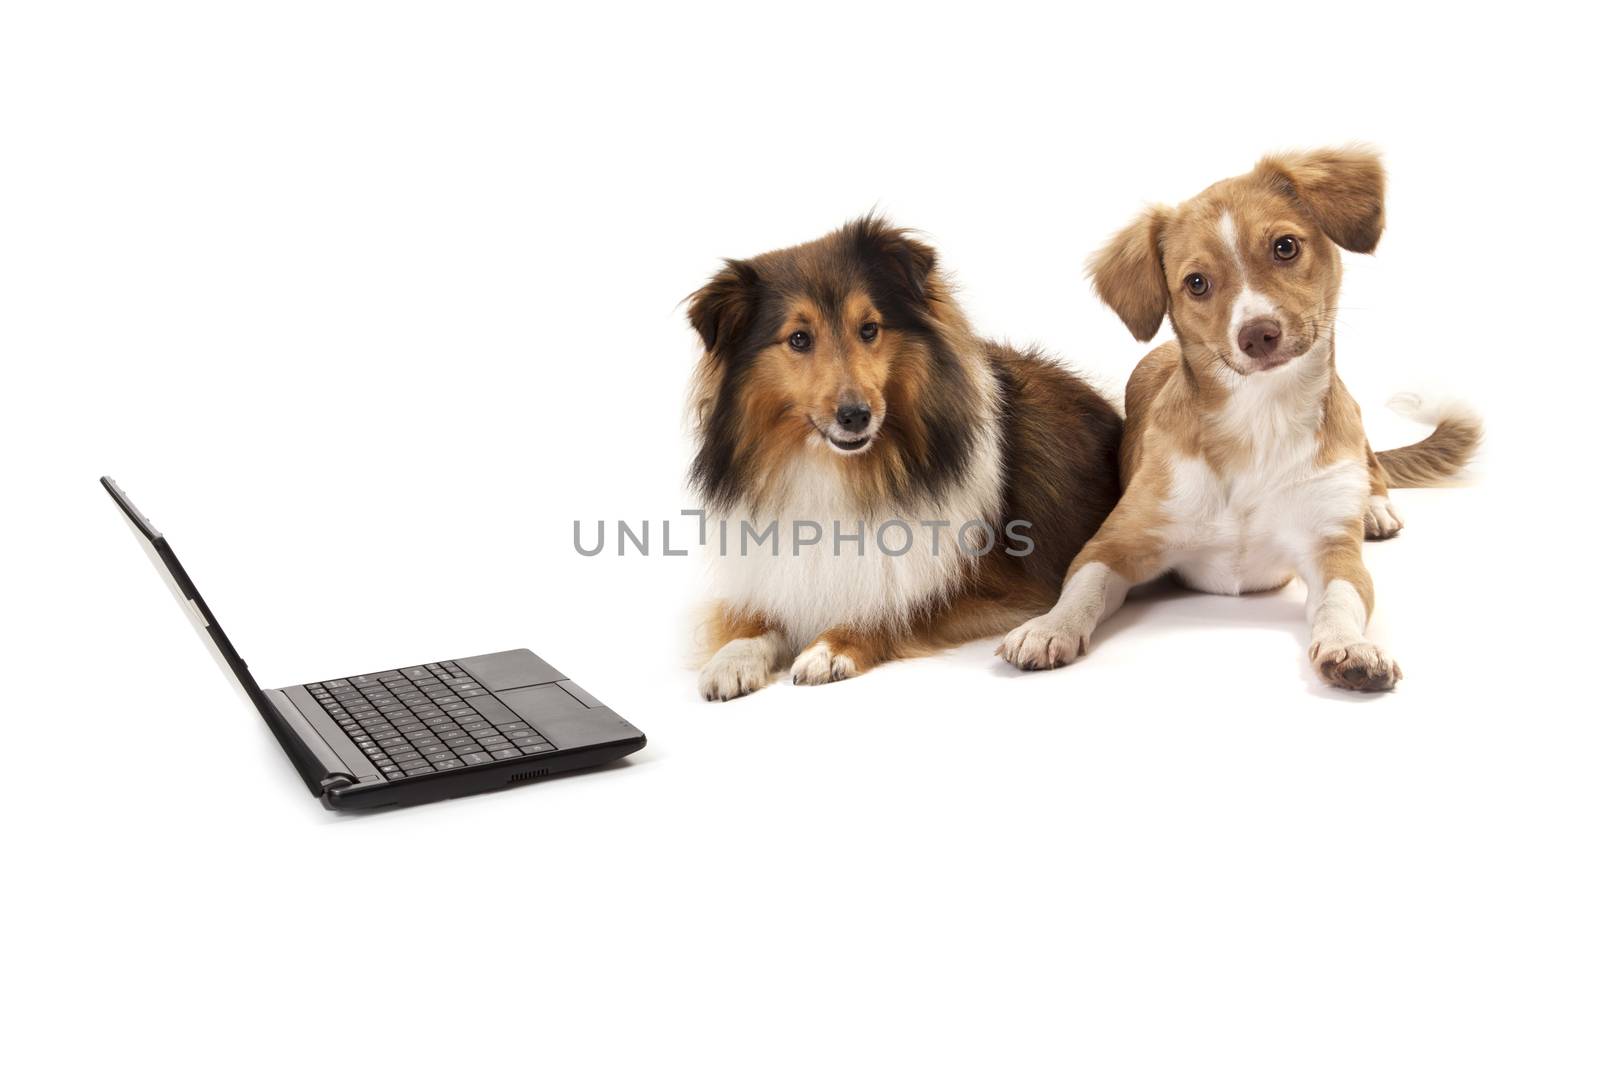 Dogs sitting besides laptop by Aarstudio